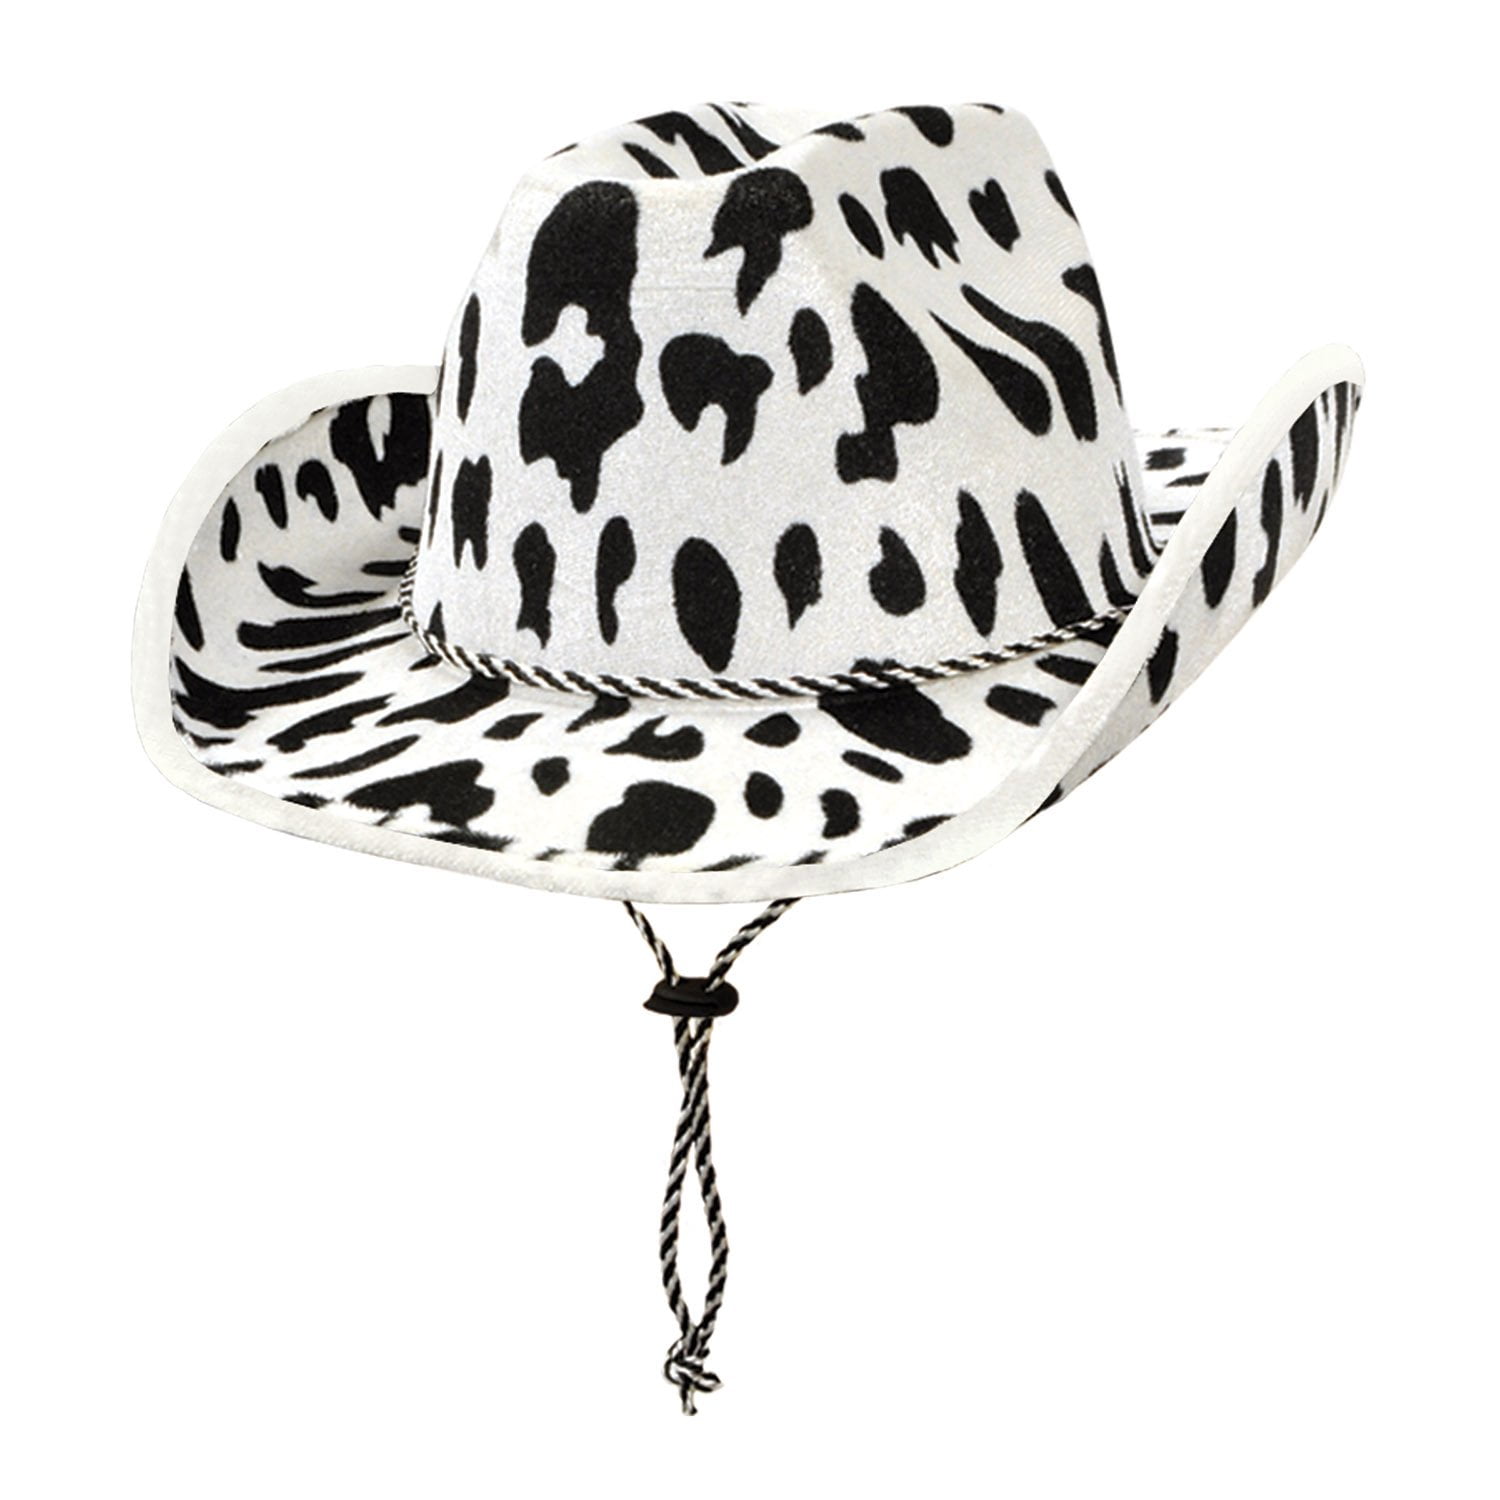 Rodeo Country Style GIFTEXPRESS 2-pack Cow Print Felt Cowboy Hat Black and White for Dress-up Party Unisex Western Accessories 